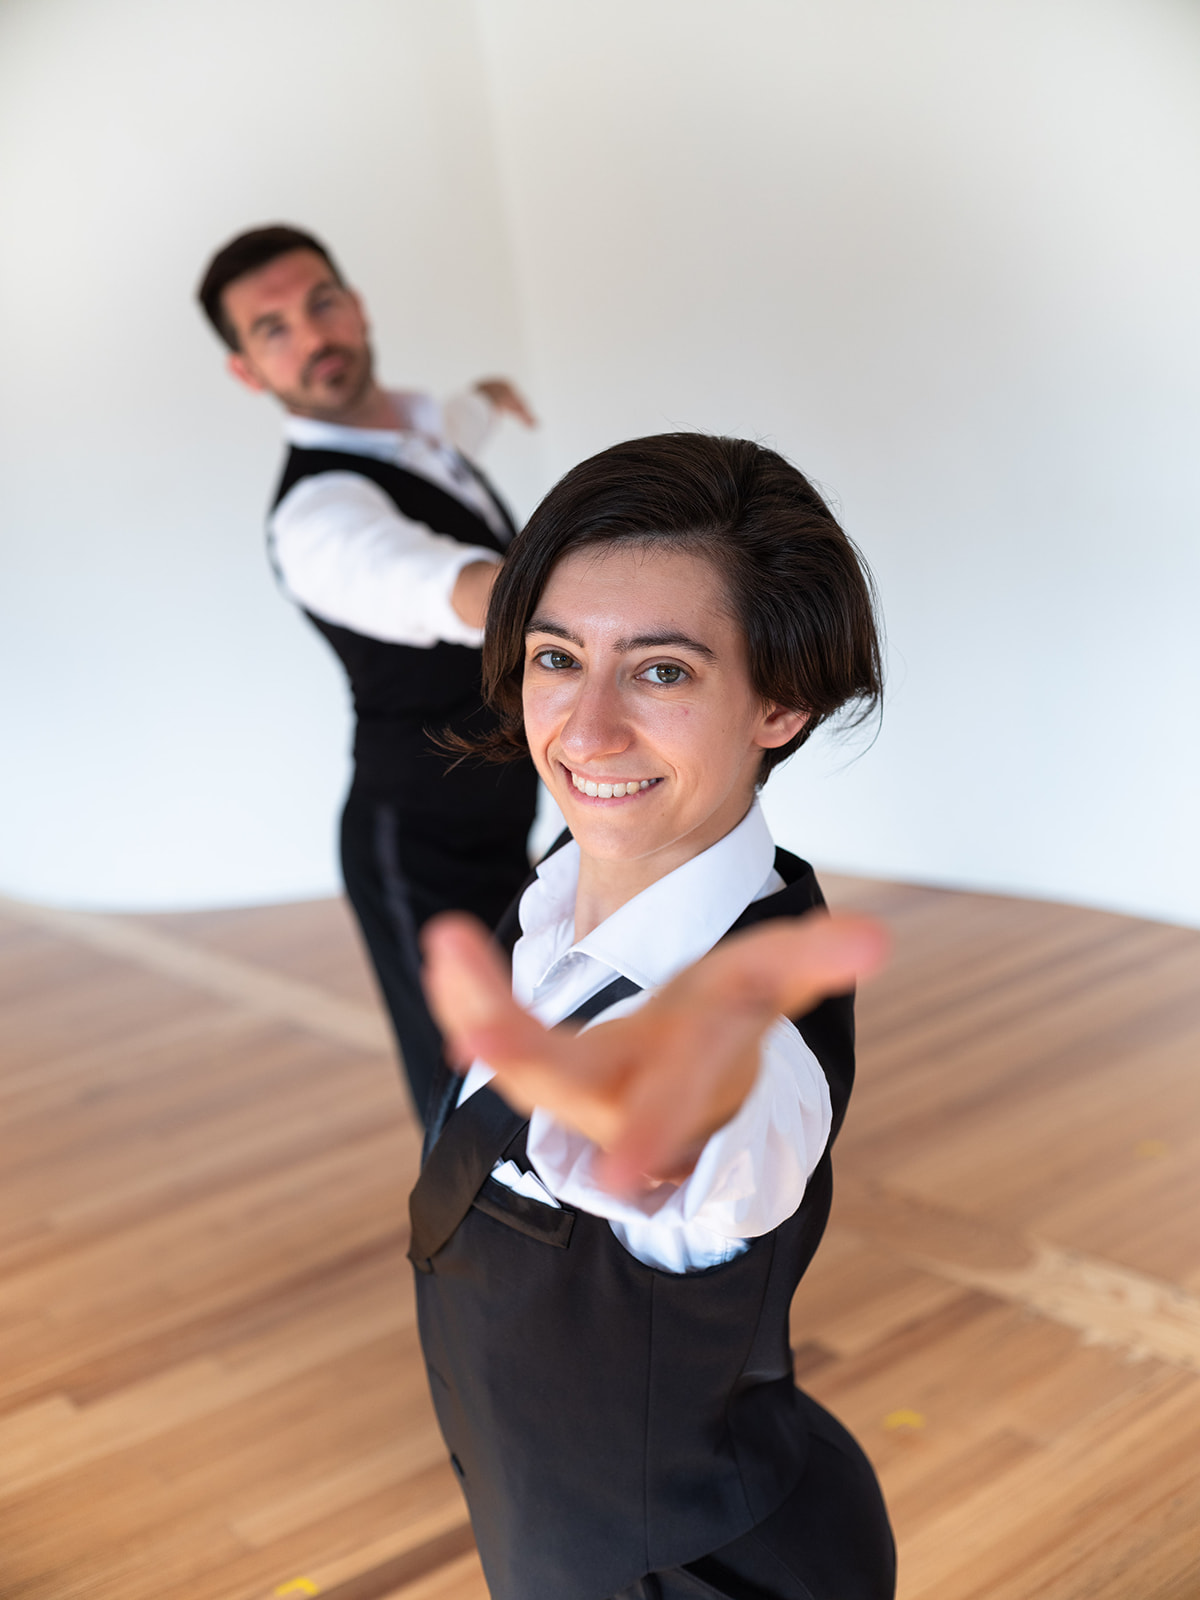 Photo of Holly Stone and Michael Winward dancing together. Holly reaches towards camera and smiles.